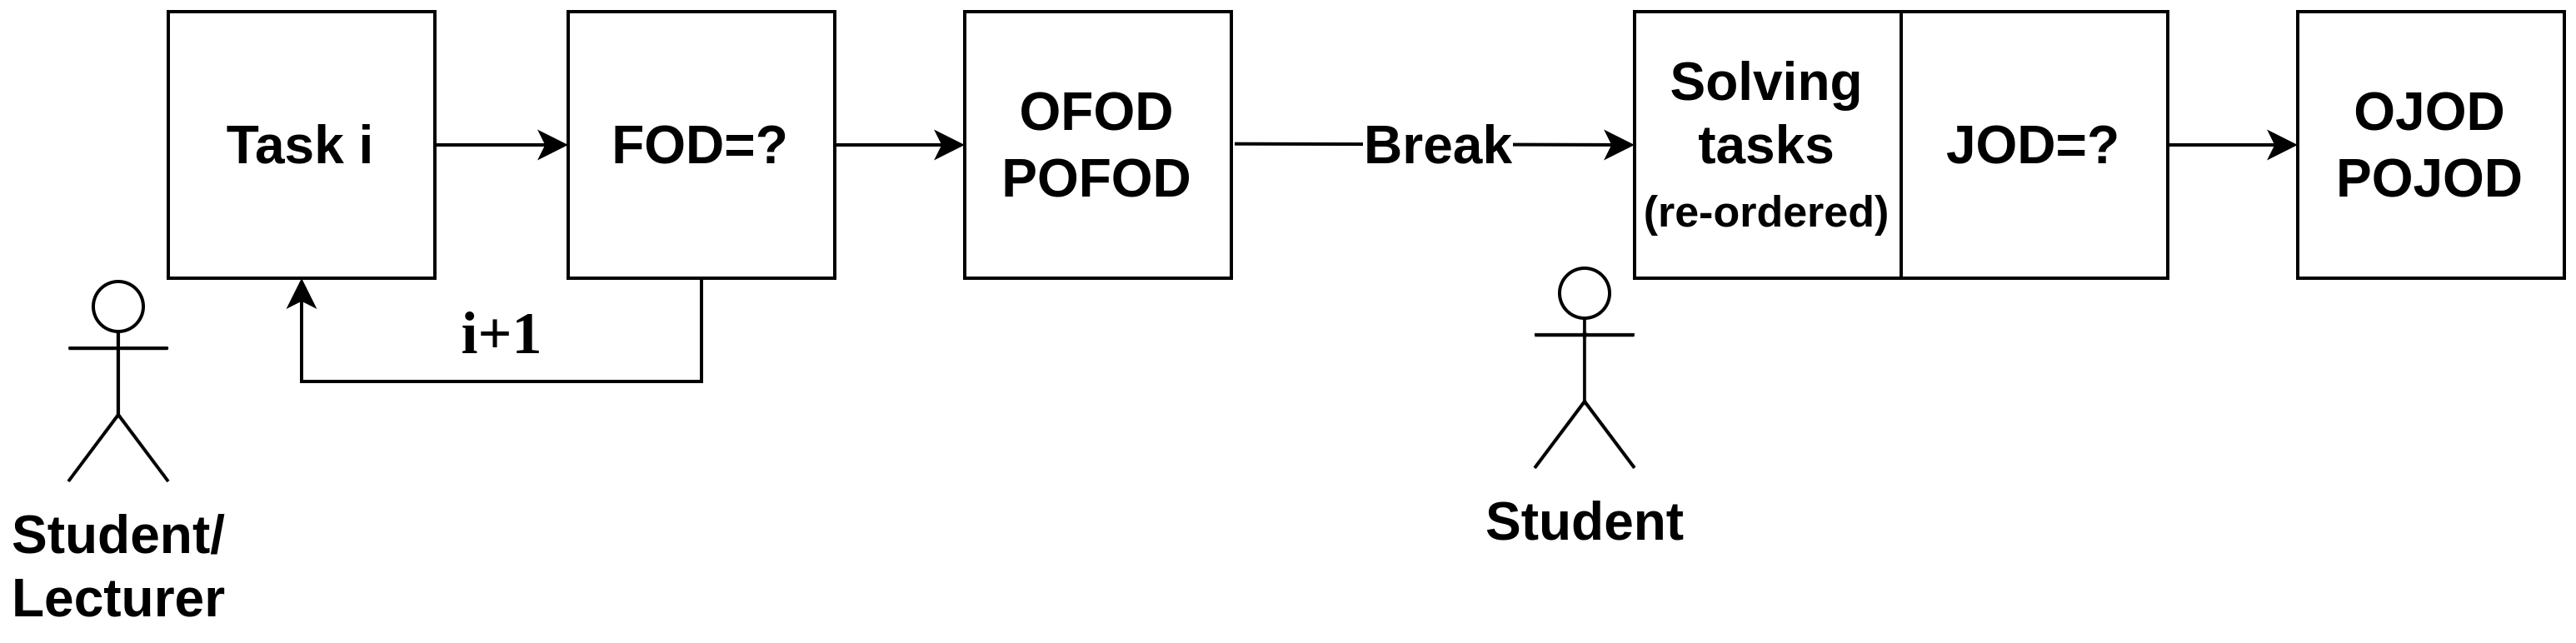 The students and lecturers were shown a set of tasks for which they had to report FOD values. After doing so for all tasks, they had to report OFOD and POFOD. After a break, the students had to solve the tasks that were presented in re-ordered form on the test sheet. At the end of each task, they had to report JOD. After finishing the test, students had to report OJOD and POJOD.